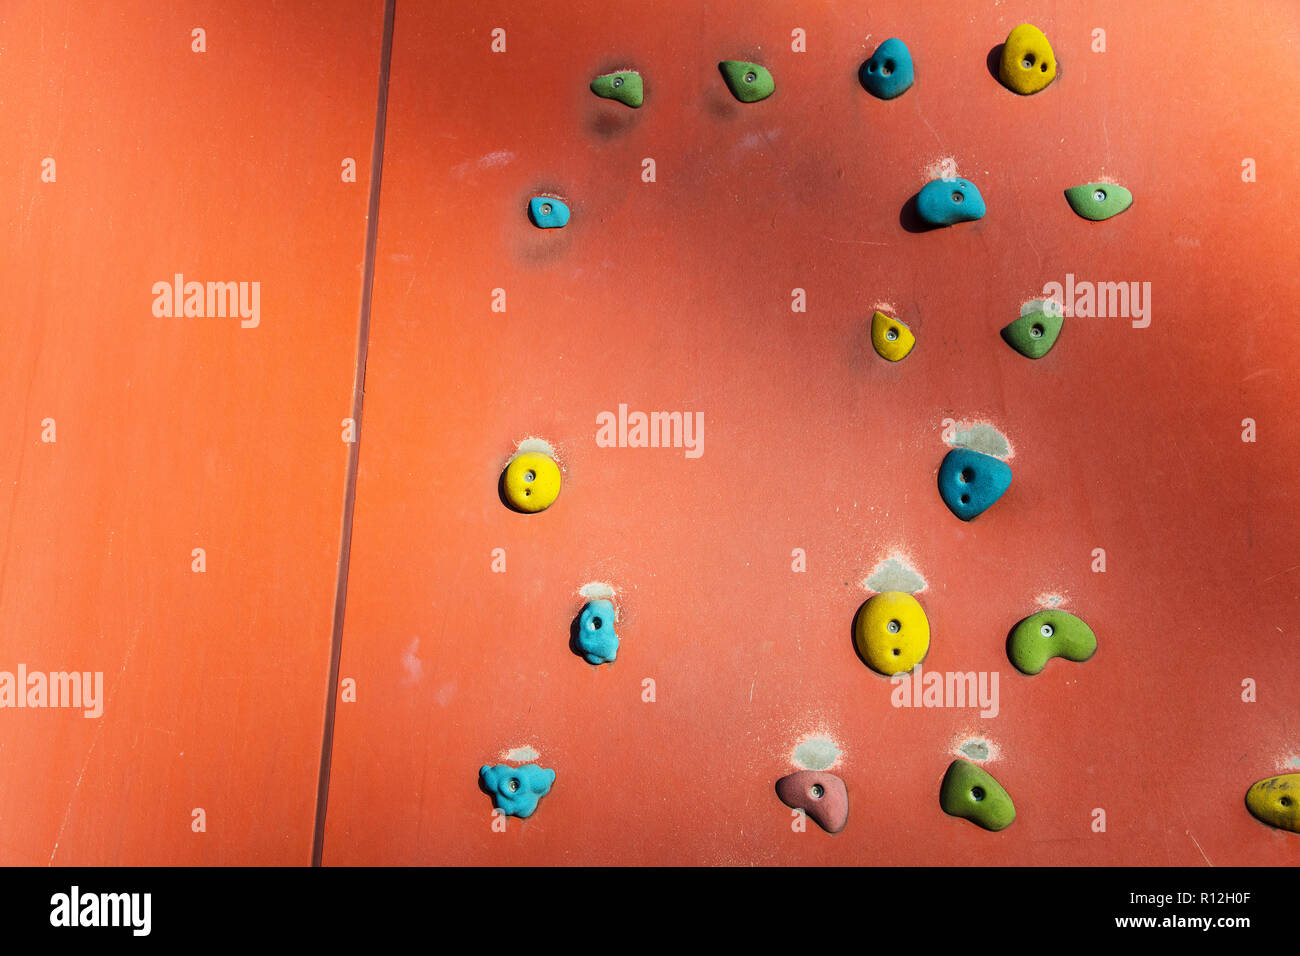 Rock climbing or Bouldering wall with colourful hand holds Stock Photo